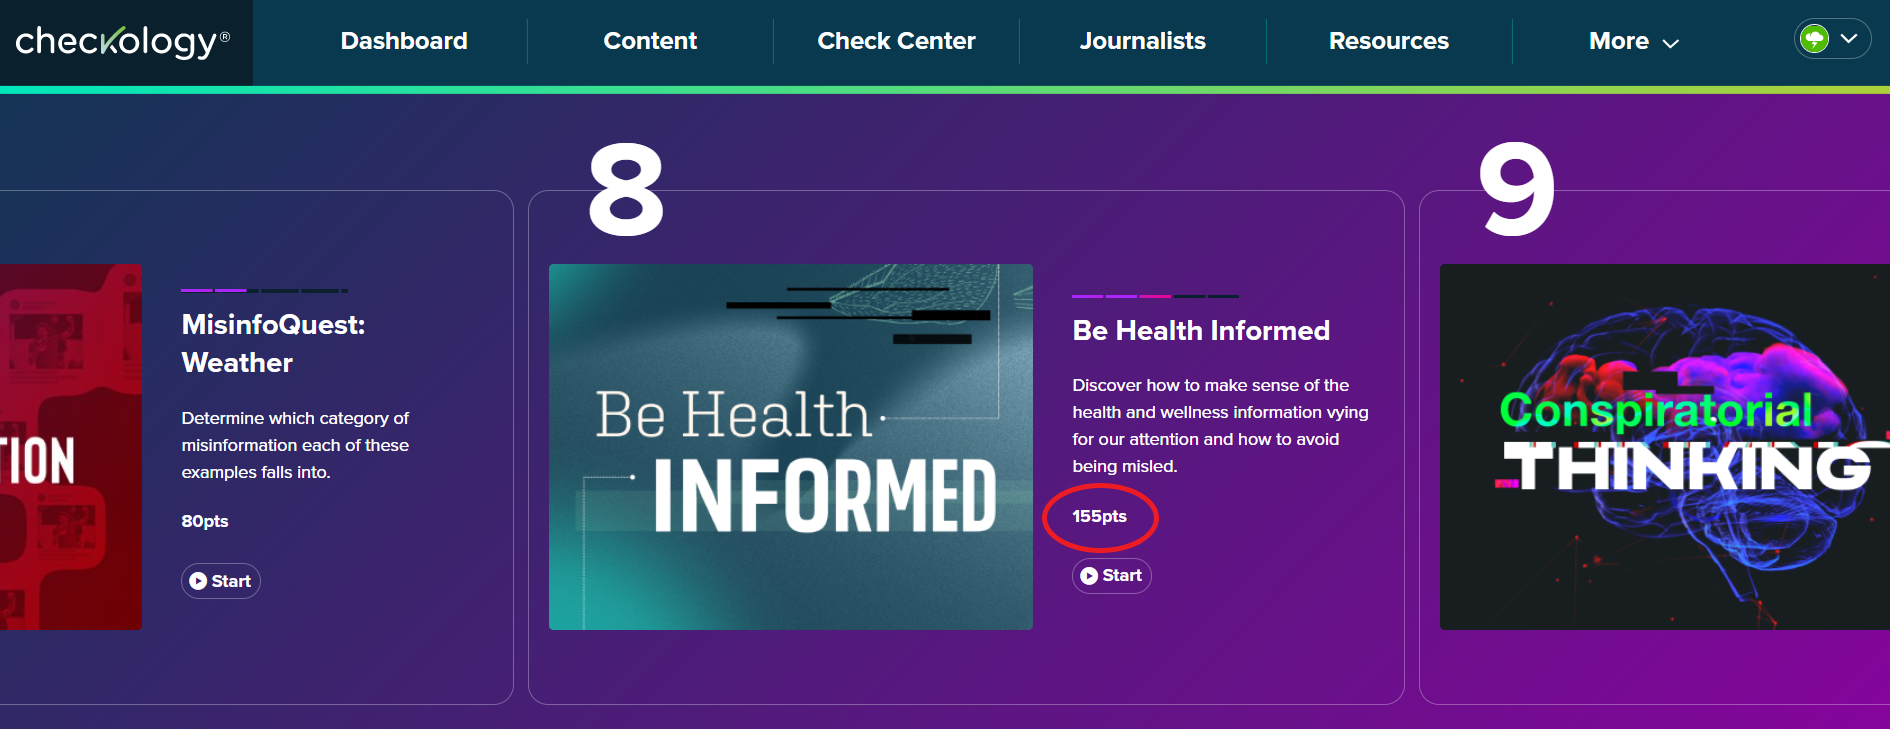 Points_Be_Health_Informed.png